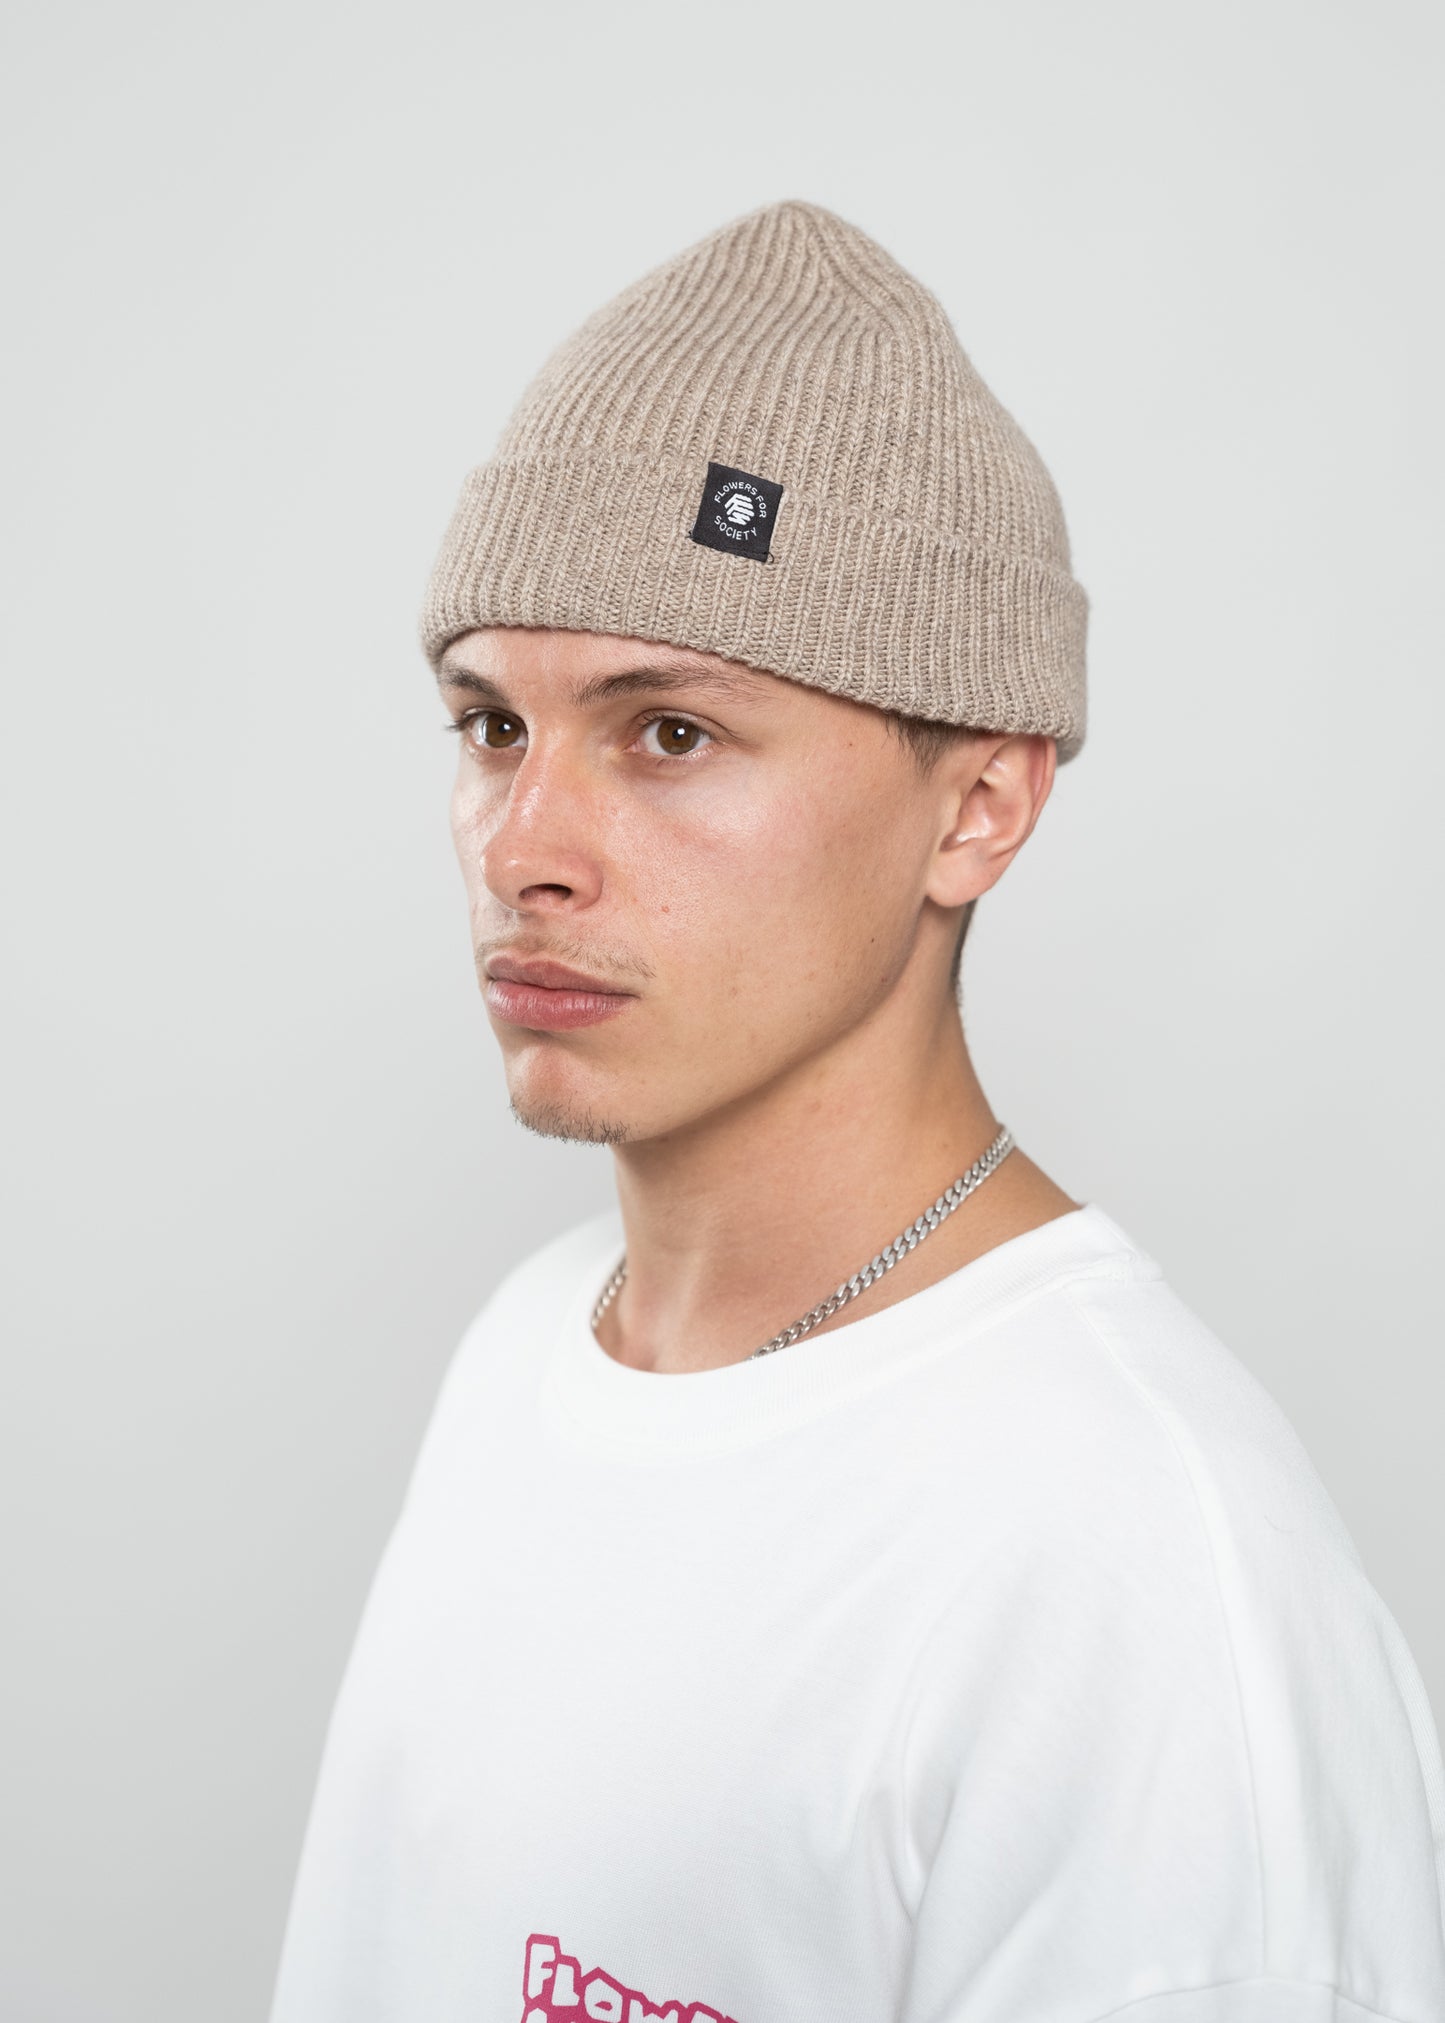 Flowers for Society beanie creme sideview worn by model Ben